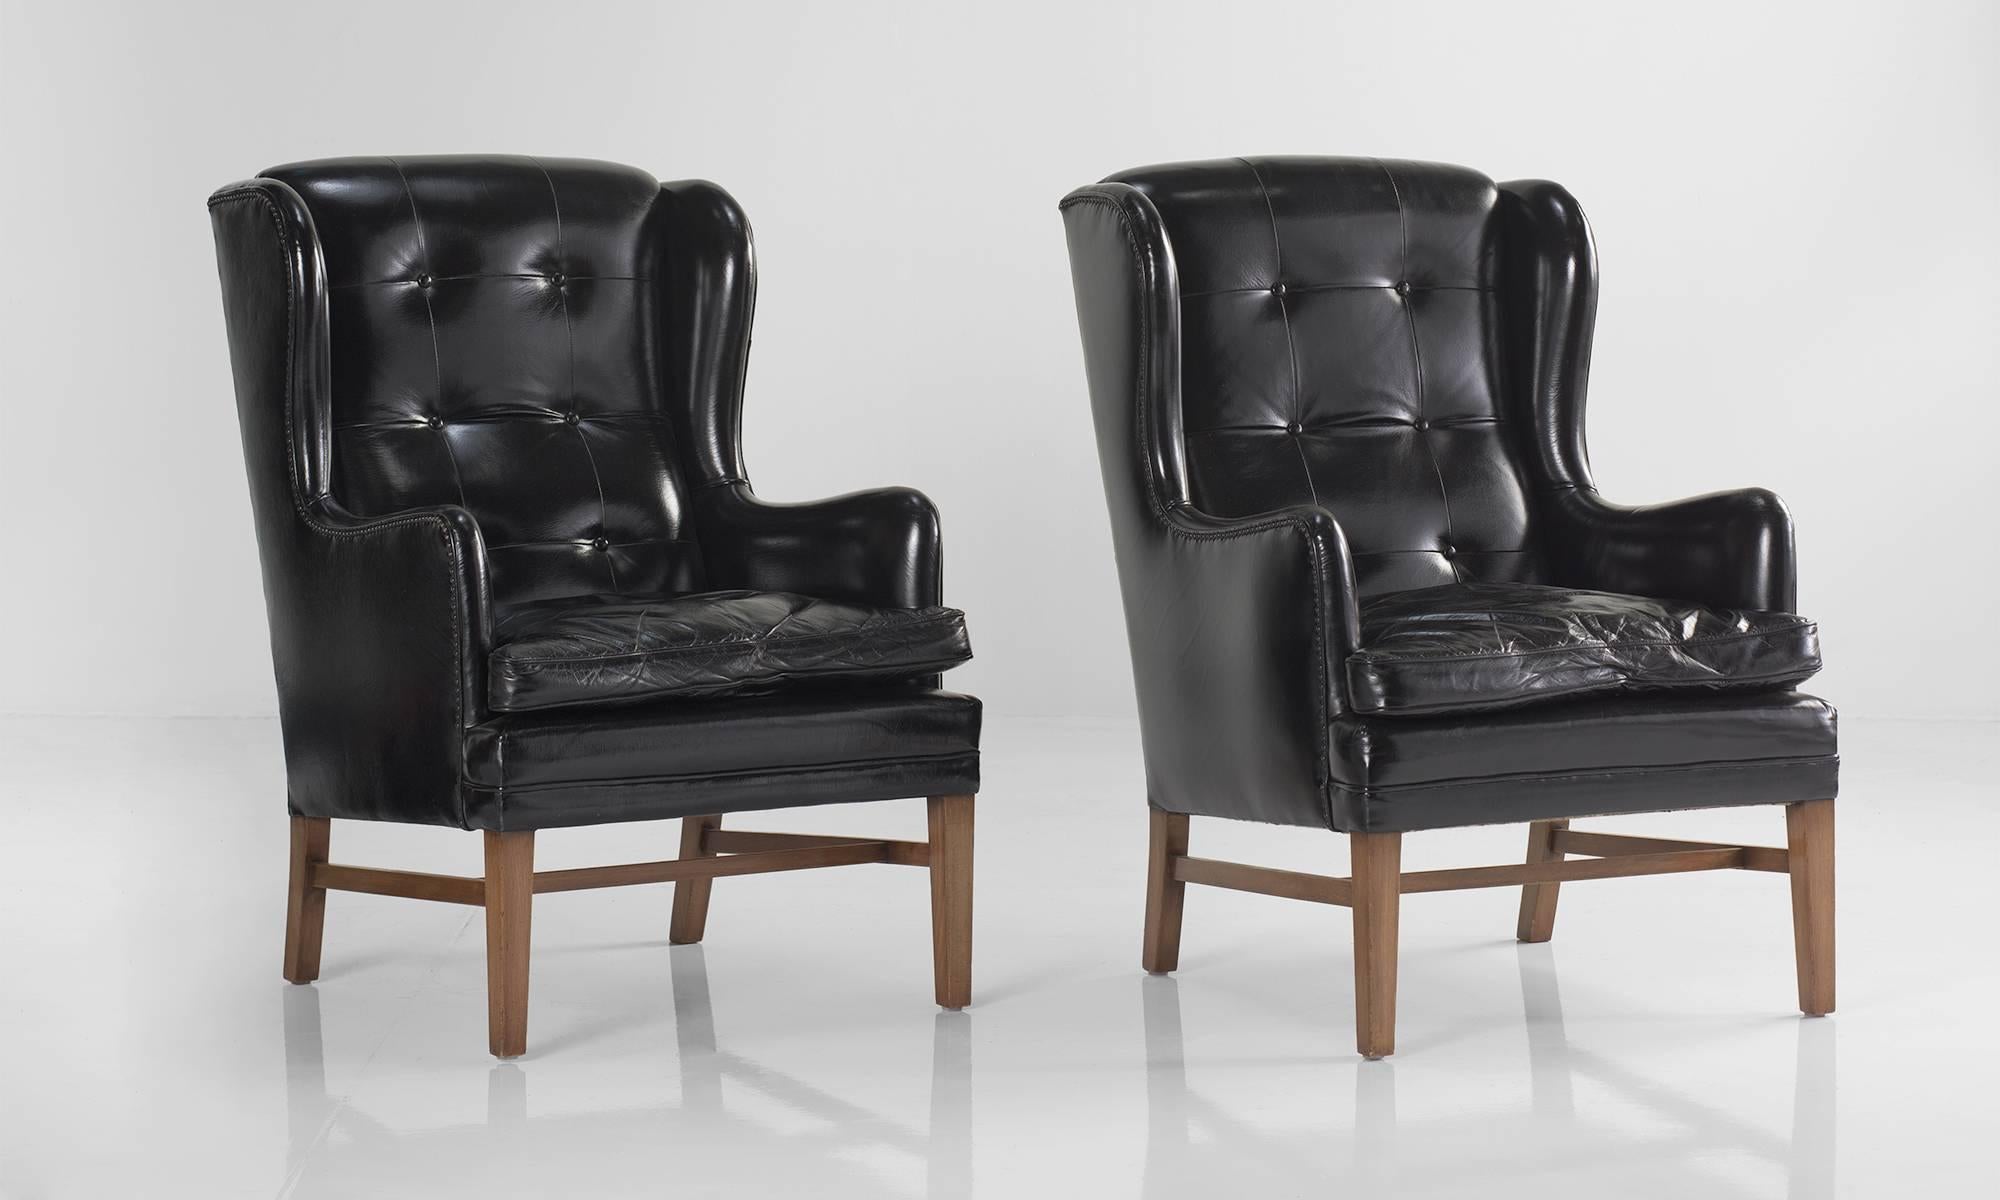 Black Leather Wing Armchairs, Sweden, circa 1950

Button back upholstery on walnut color birch frame. 